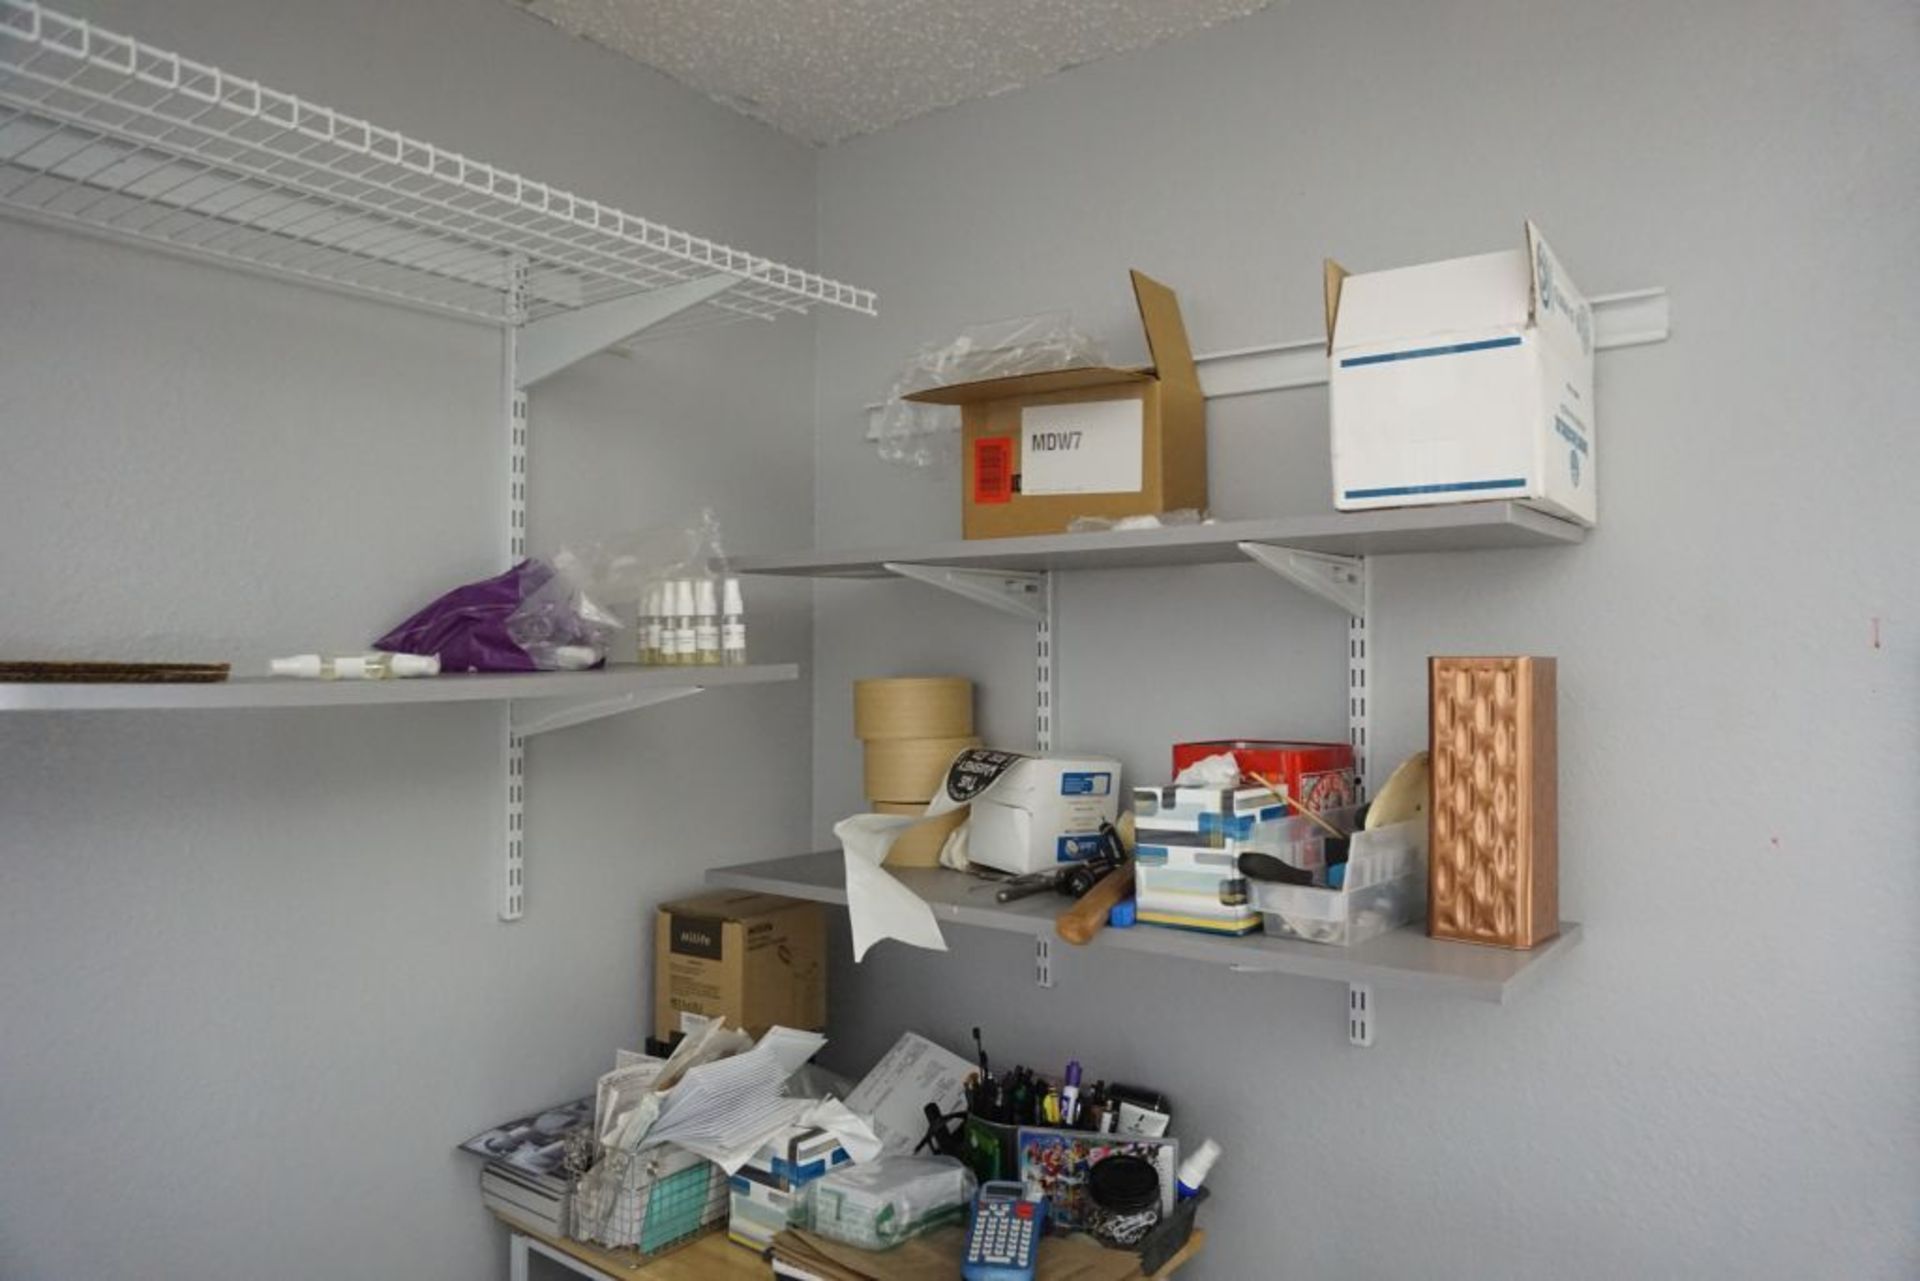 Lot of Room Contents|Includes: Workbench, Routers, Cabinets, Tripod, Office Supplies; Tag: 221190 - Image 13 of 16